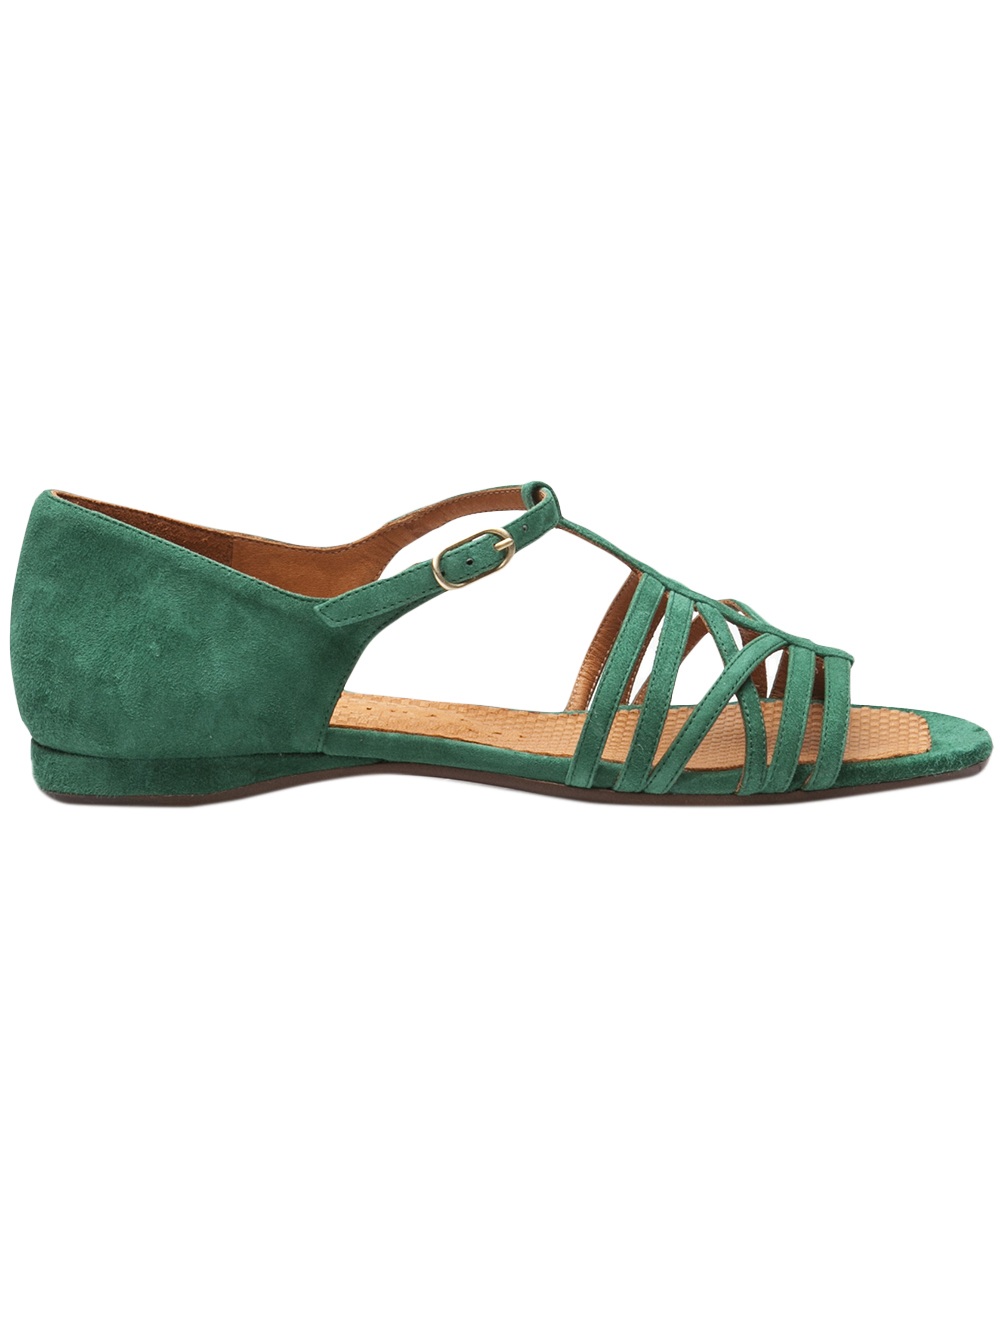 Chie Mihara Gipsy Flat in Green - Lyst